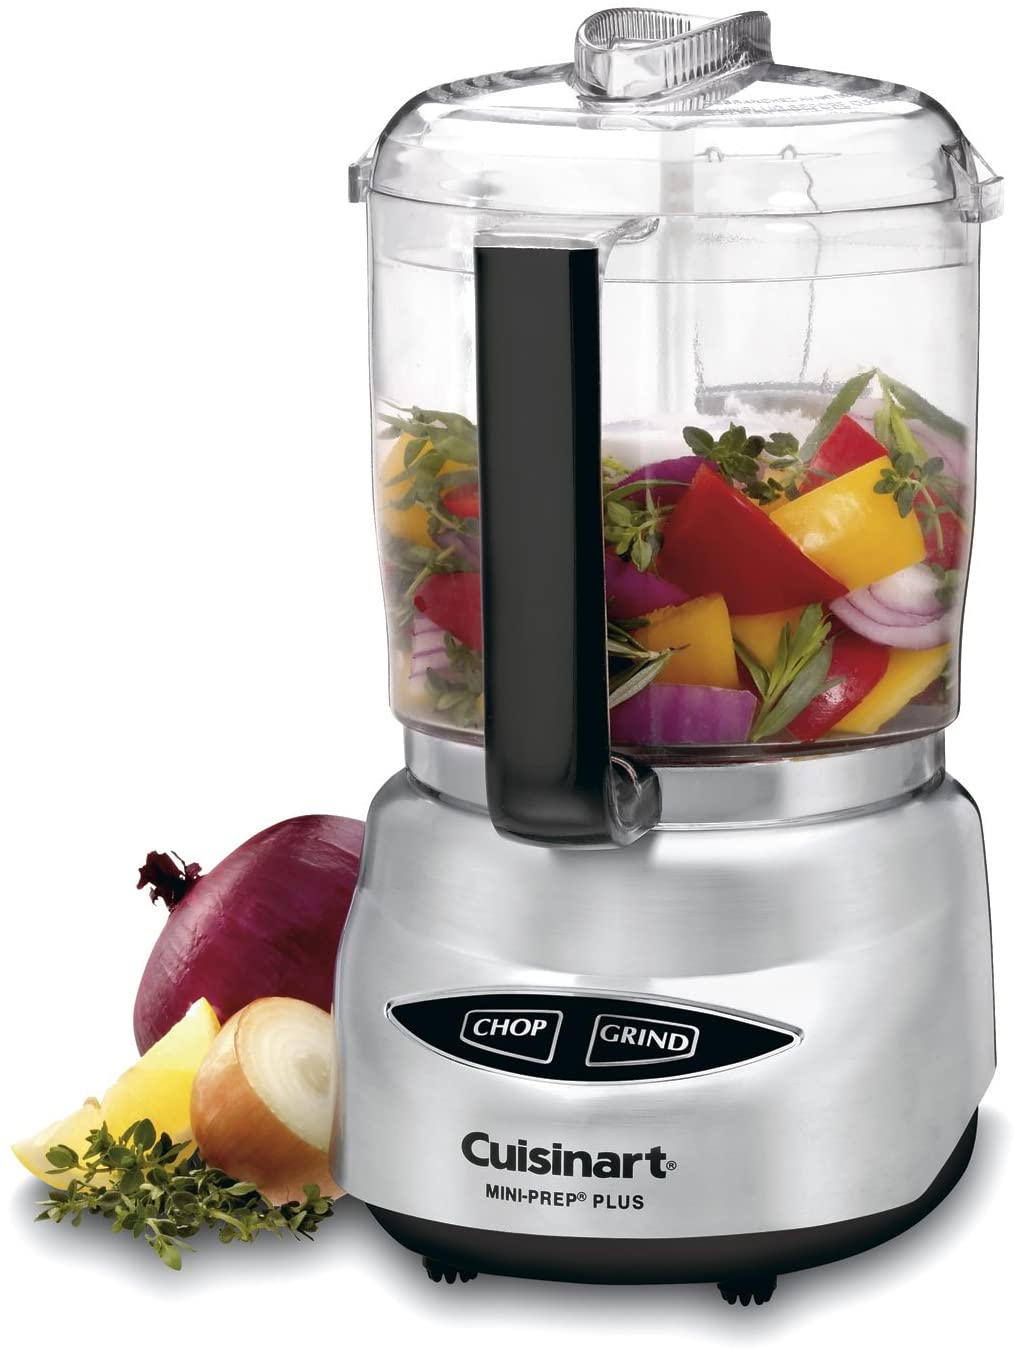 Cuisinart Elemental FP-13DSV 13 Cup Food Processor with Dicing - Stainless Steel